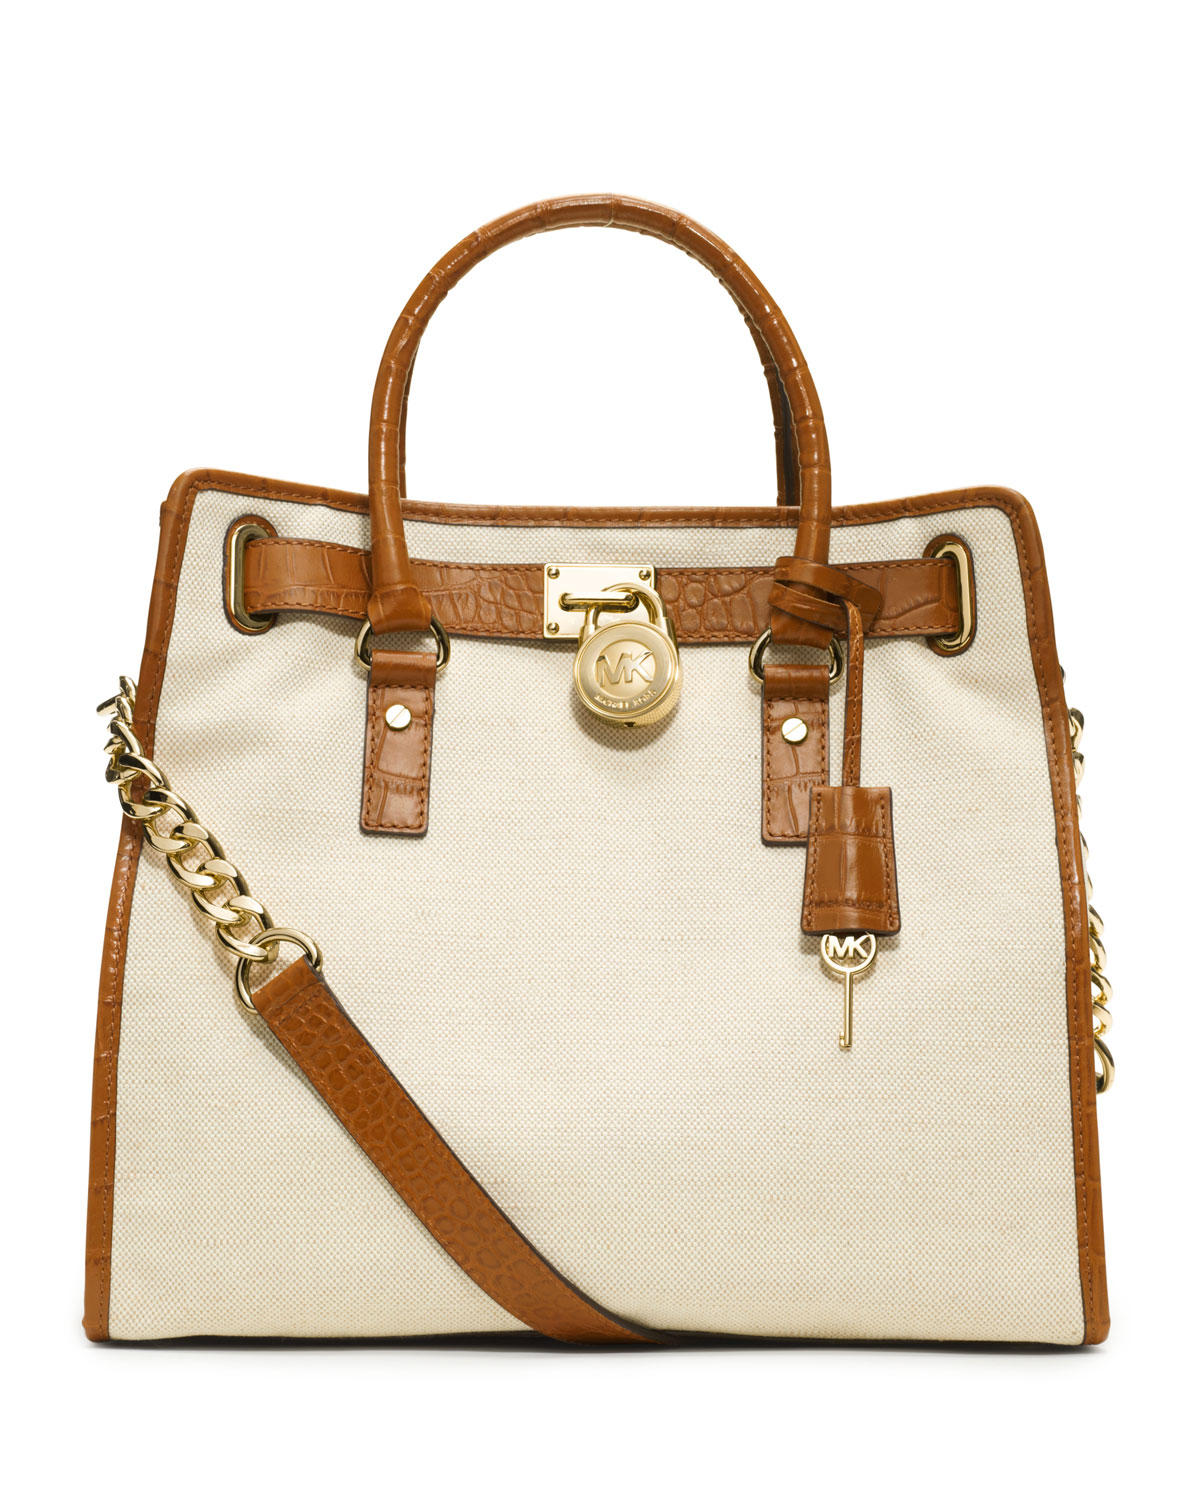 Michael Kors Large Hamilton Canvas Tote in Natural - Lyst